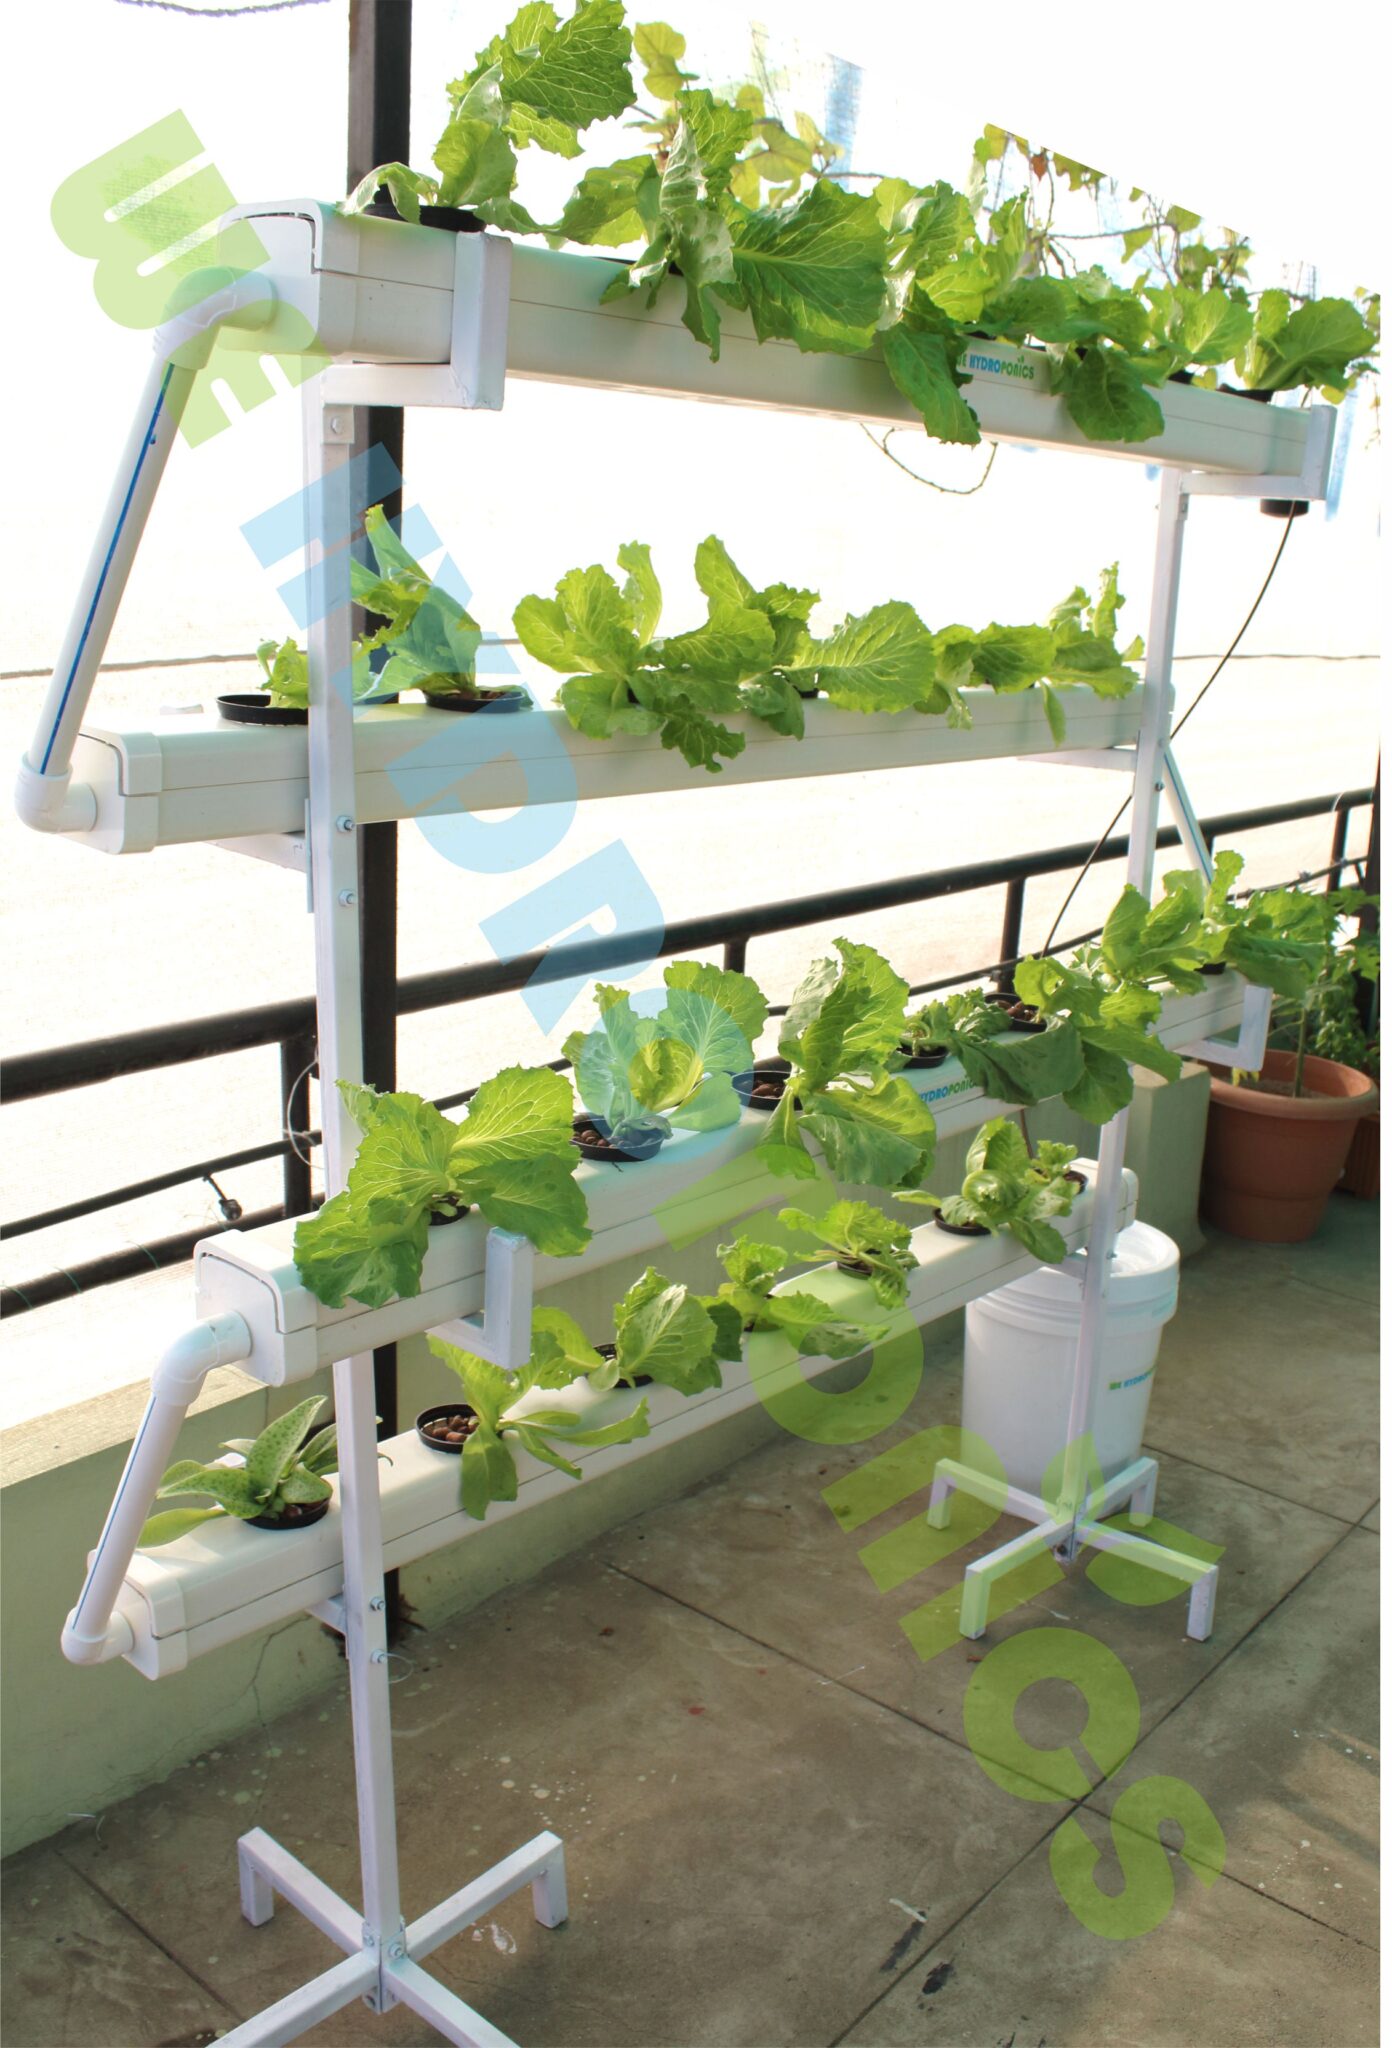 28 Planter Hydroponics NFT / DFT system - Portable, Easy and ready to